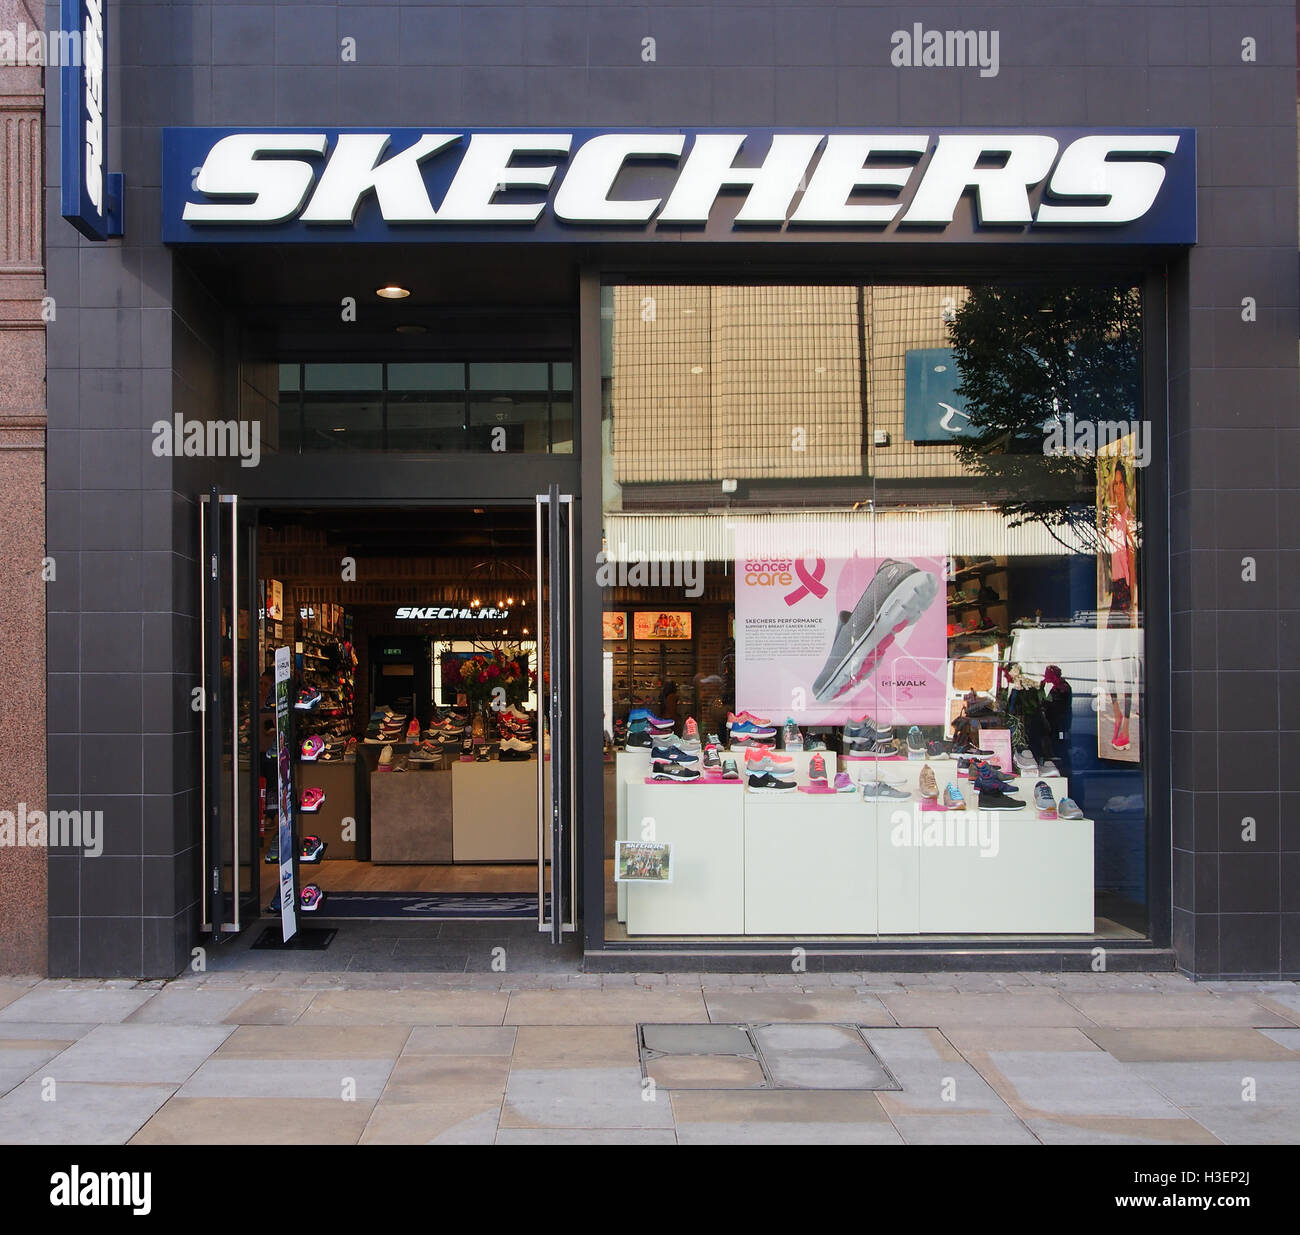 Sketchers shoe shop in the centre of 